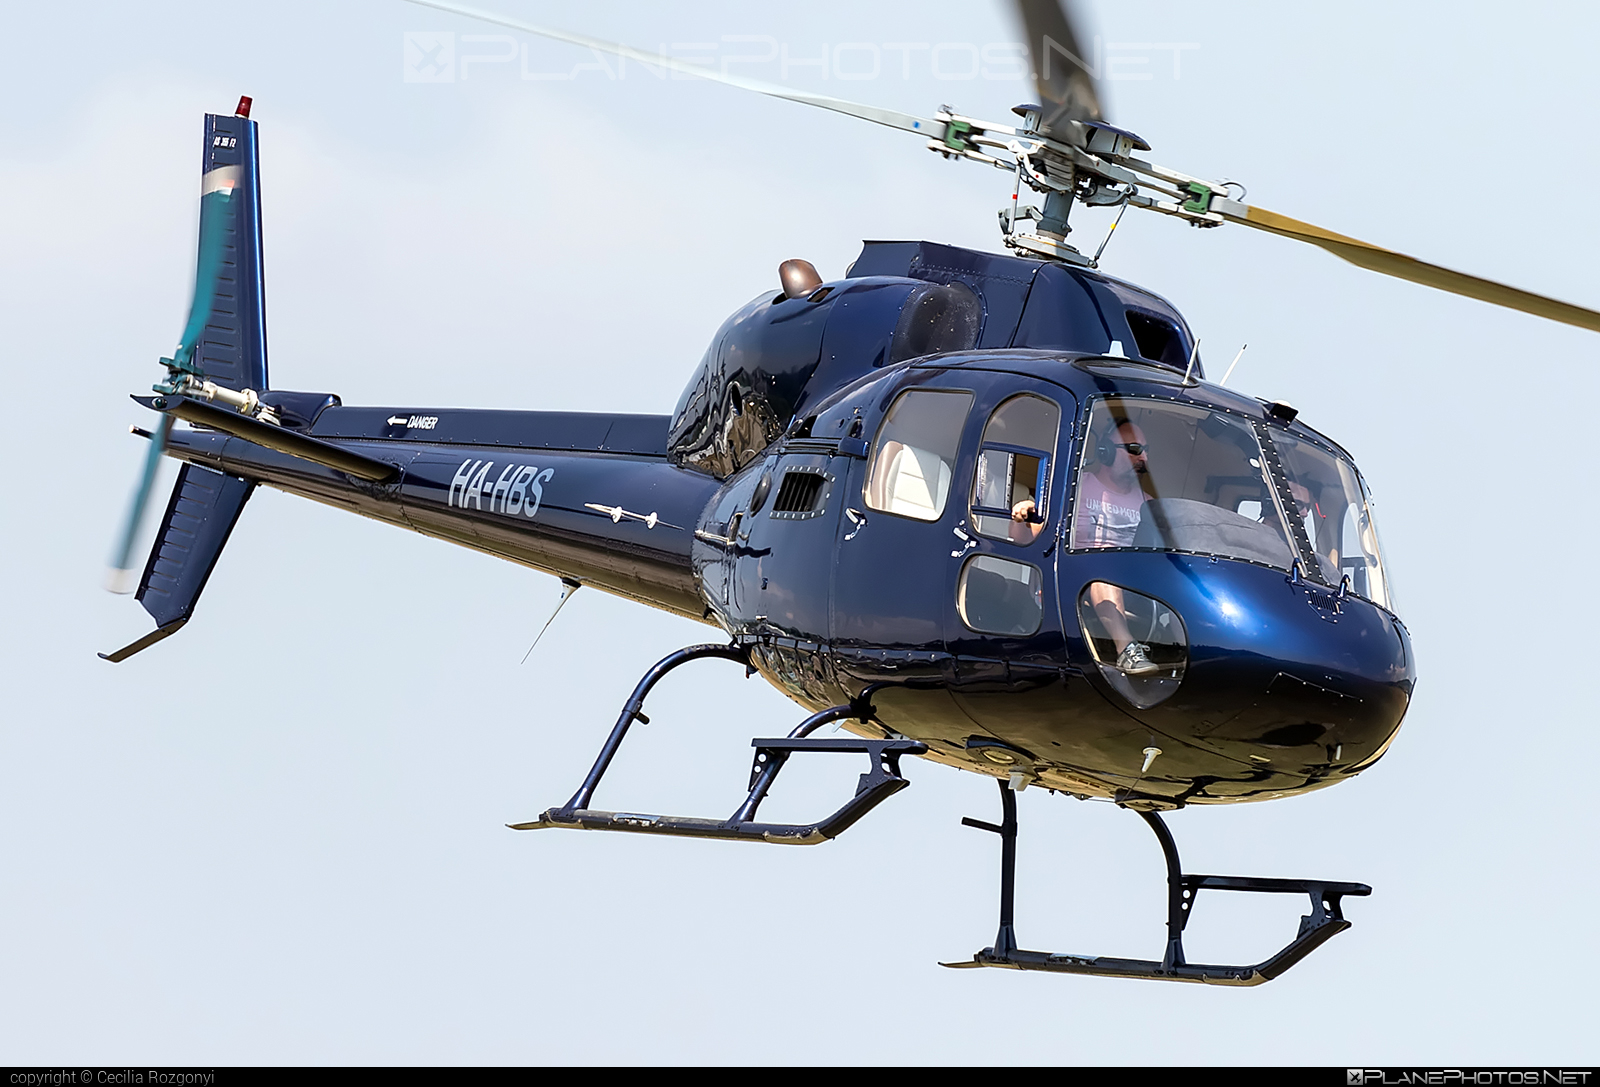 Aerospatiale AS355 F2 Ecureuil 2 - HA-HBS operated by Fly-Coop #aerospatiale #aerospatialeecureuil #as355 #as355ecureuil2 #as355f2 #as355f2ecureuil2 #ecureuil2 #flycoop